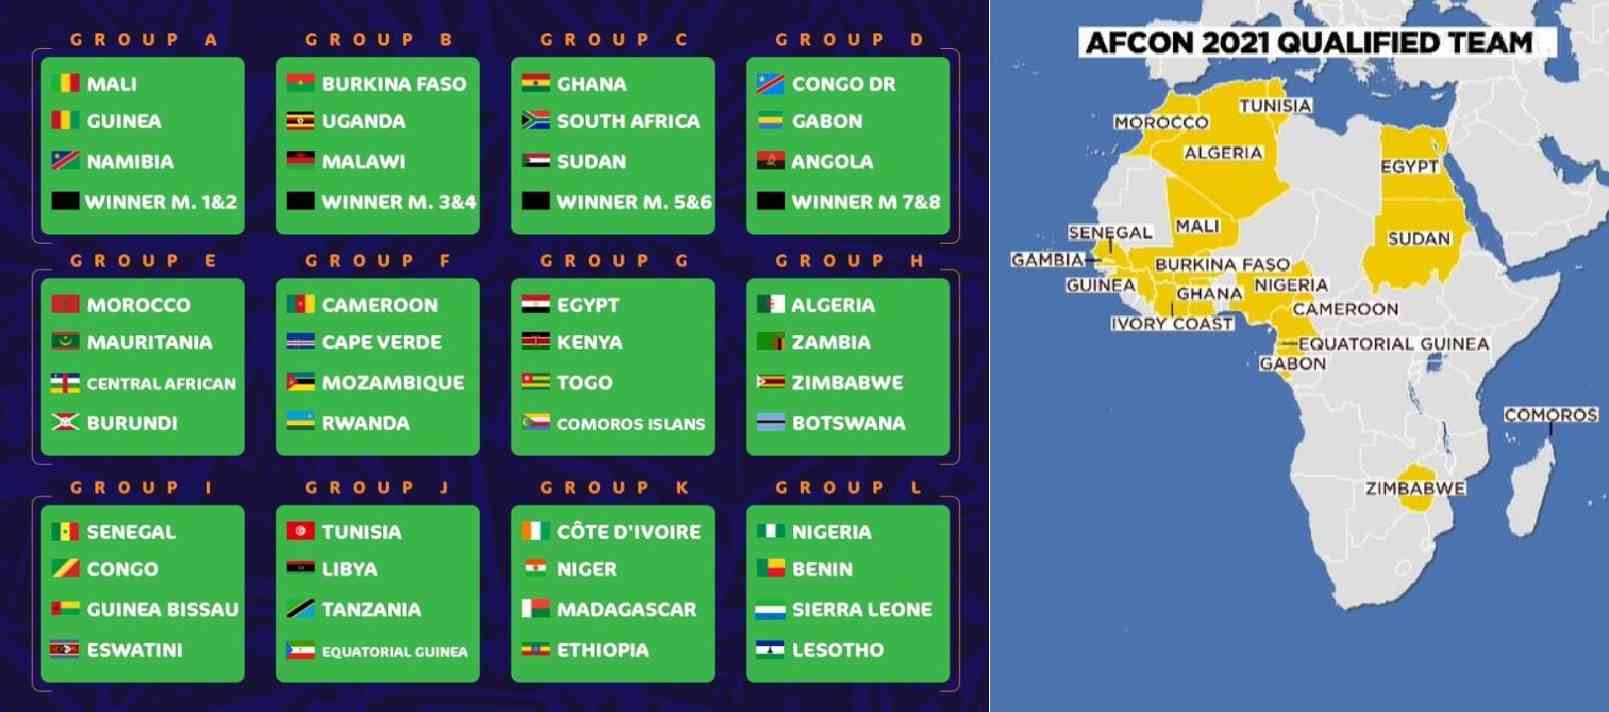 Africa Cup of Nations 2021 Groups